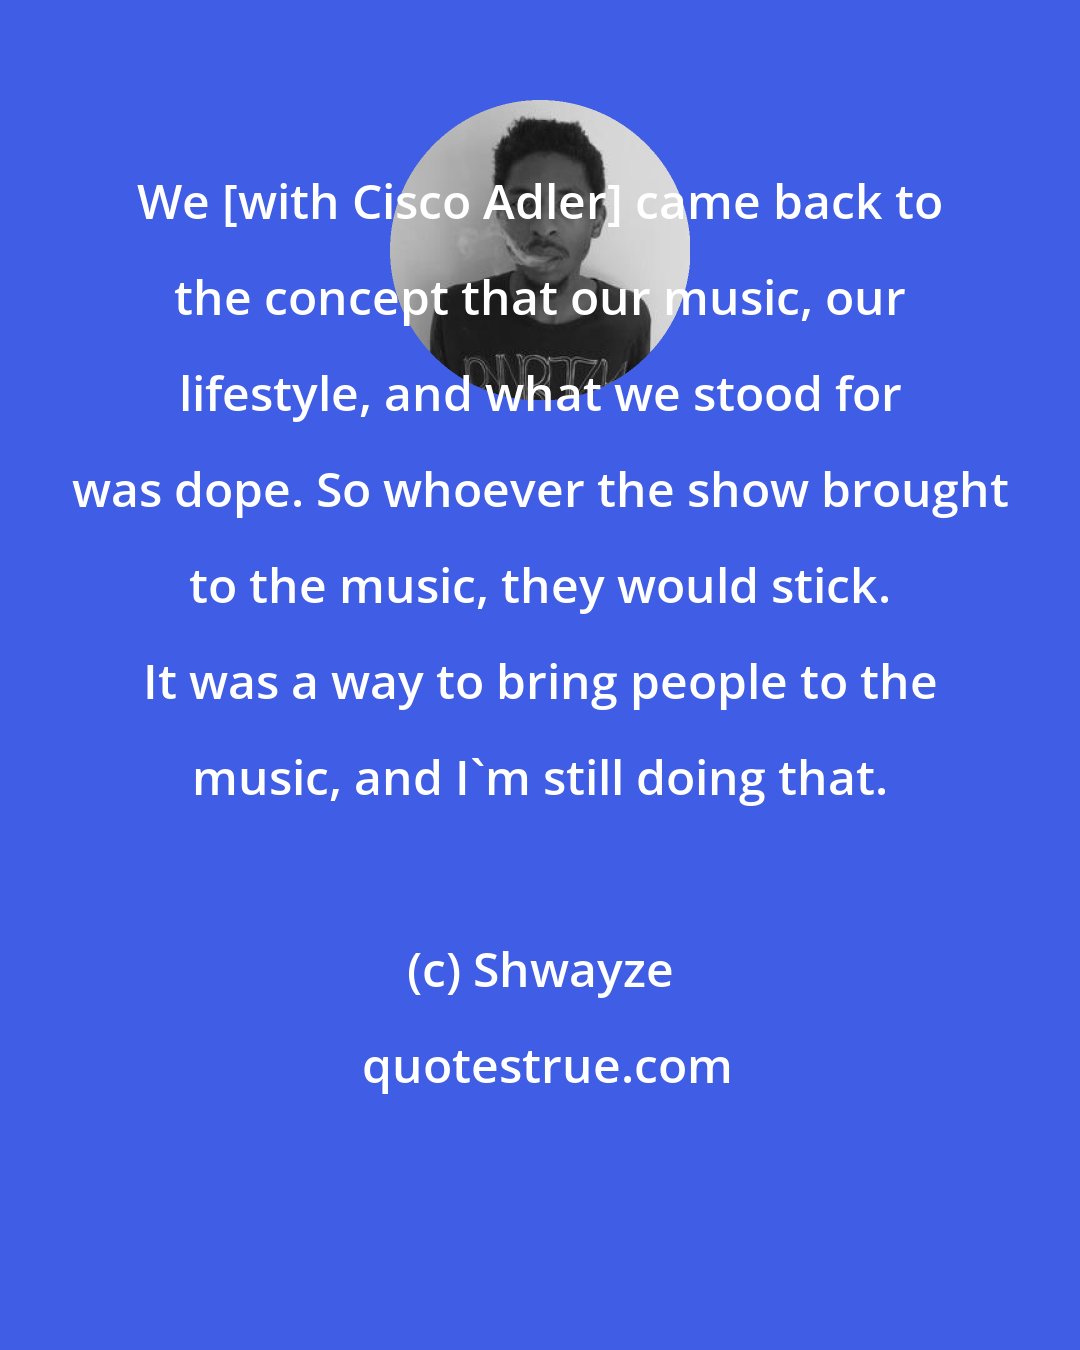 Shwayze: We [with Cisco Adler] came back to the concept that our music, our lifestyle, and what we stood for was dope. So whoever the show brought to the music, they would stick. It was a way to bring people to the music, and I'm still doing that.